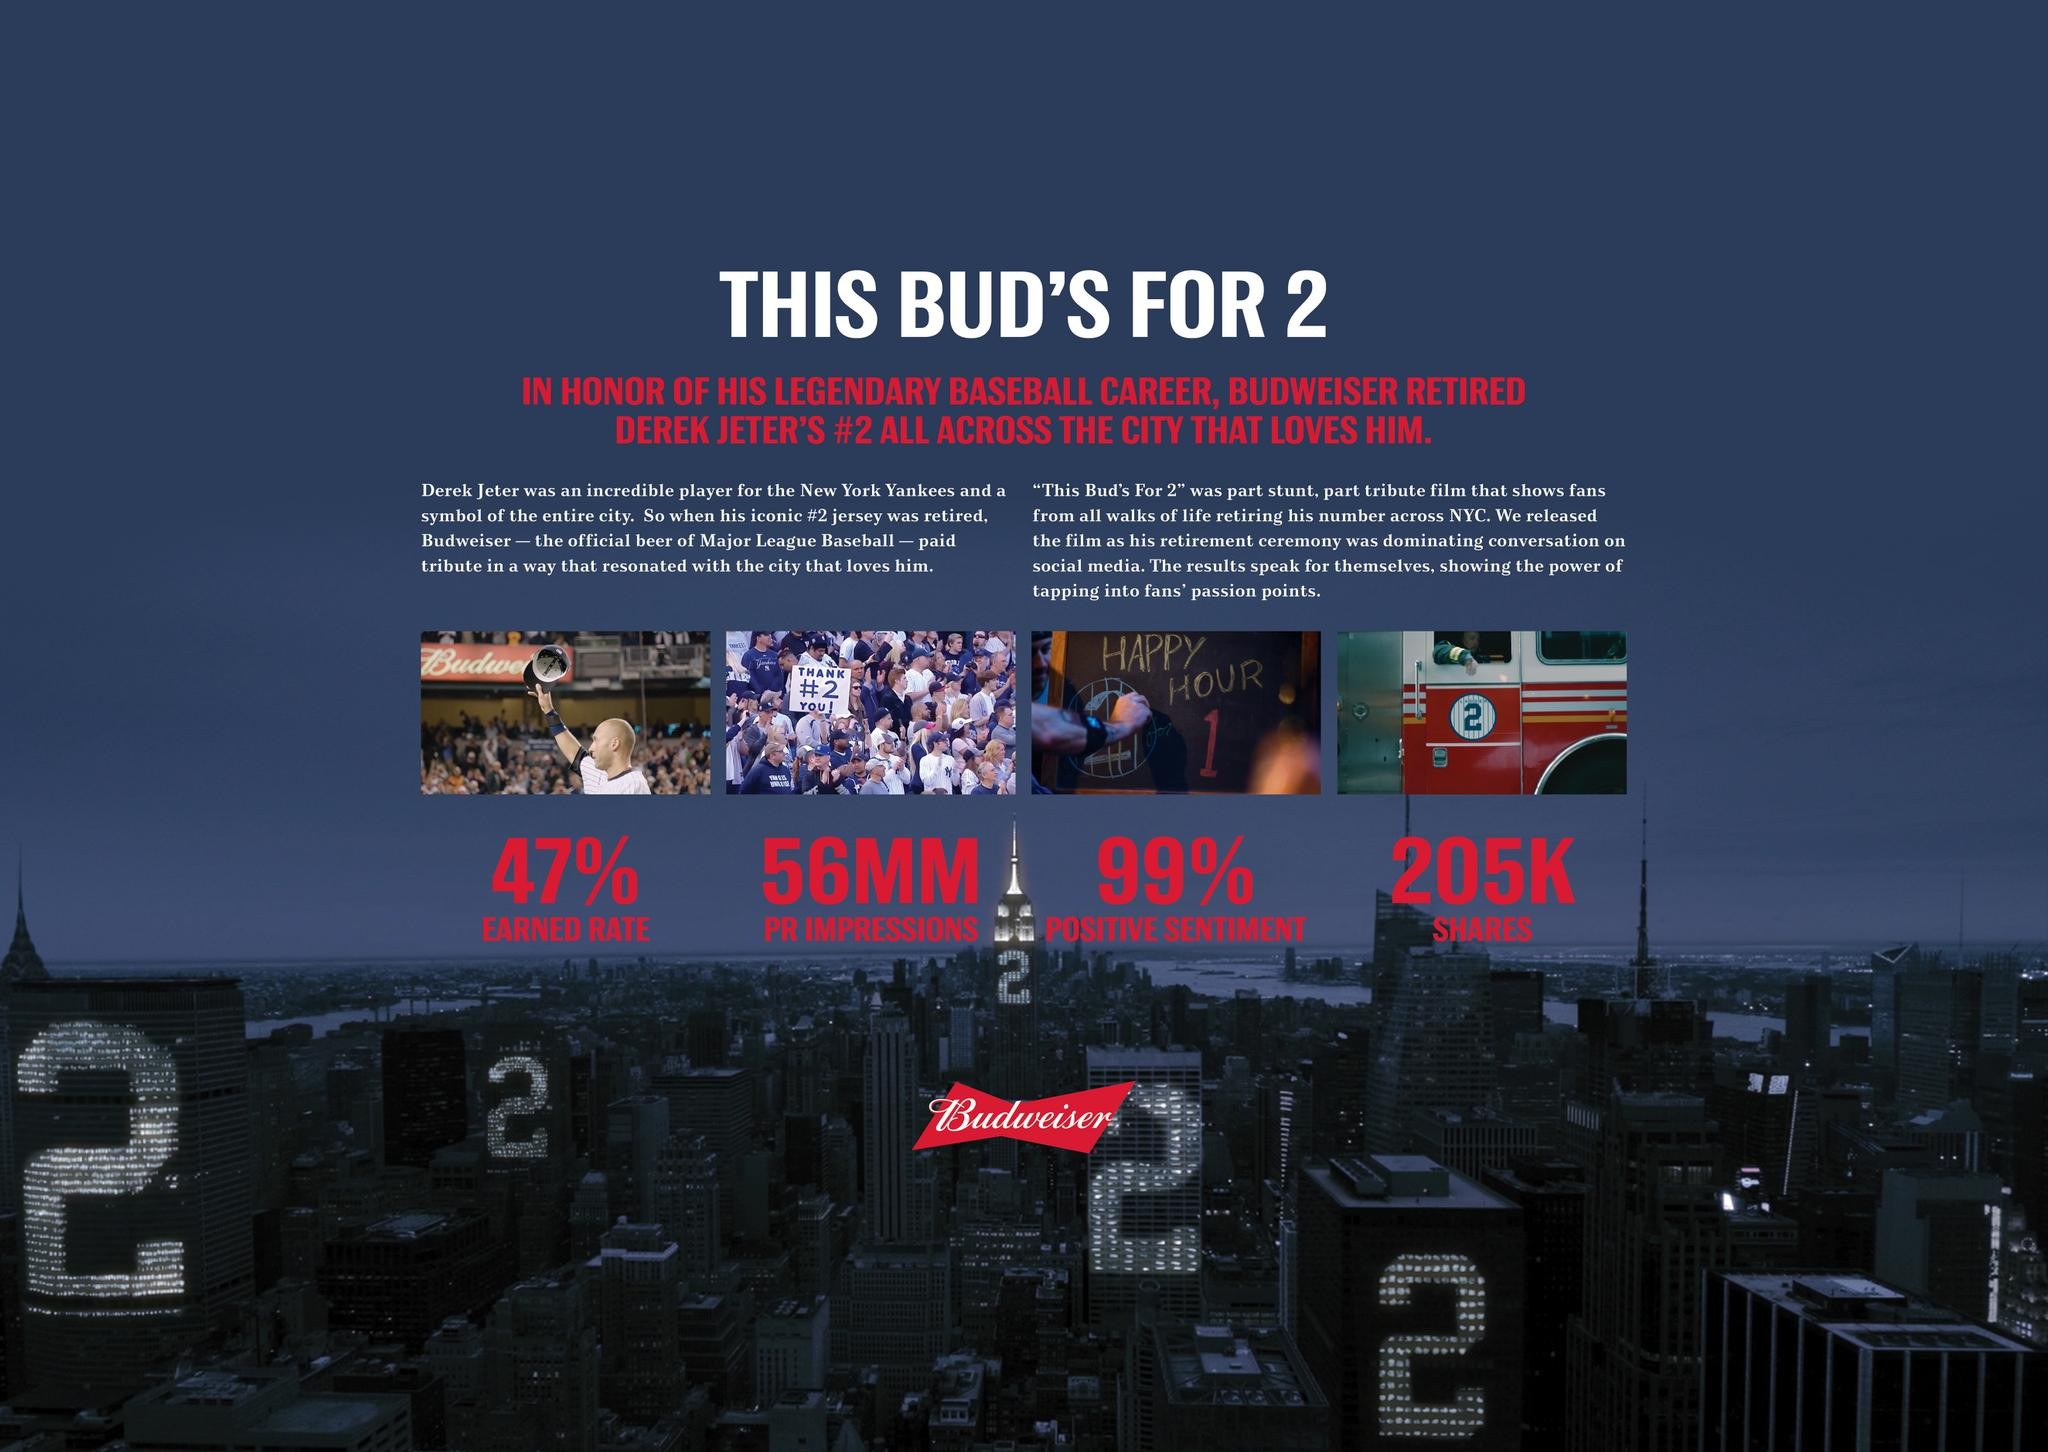 BUDWEISER: THIS BUD'S FOR TWO